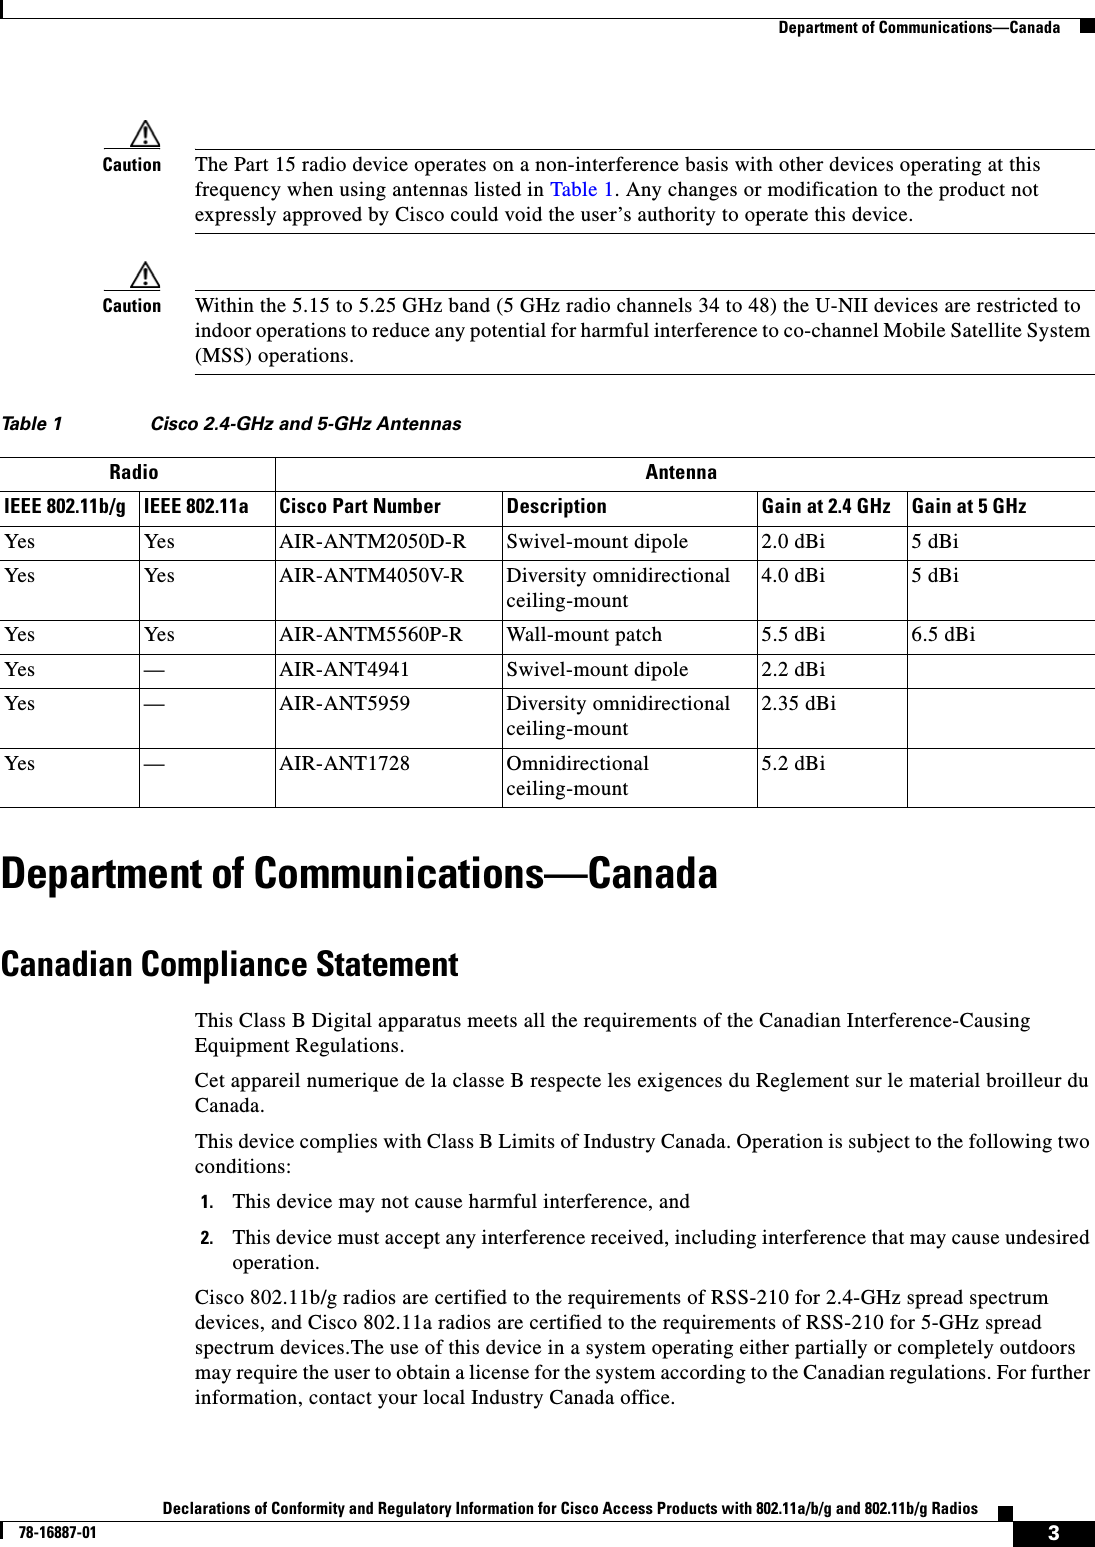  3Declarations of Conformity and Regulatory Information for Cisco Access Products with 802.11a/b/g and 802.11b/g Radios78-16887-01   Department of Communications—CanadaCaution The Part 15 radio device operates on a non-interference basis with other devices operating at this frequency when using antennas listed in Table 1. Any changes or modification to the product not expressly approved by Cisco could void the user’s authority to operate this device.Caution Within the 5.15 to 5.25 GHz band (5 GHz radio channels 34 to 48) the U-NII devices are restricted to indoor operations to reduce any potential for harmful interference to co-channel Mobile Satellite System (MSS) operations.Department of Communications—CanadaCanadian Compliance StatementThis Class B Digital apparatus meets all the requirements of the Canadian Interference-Causing Equipment Regulations.Cet appareil numerique de la classe B respecte les exigences du Reglement sur le material broilleur du Canada.This device complies with Class B Limits of Industry Canada. Operation is subject to the following two conditions:1. This device may not cause harmful interference, and2. This device must accept any interference received, including interference that may cause undesired operation.Cisco 802.11b/g radios are certified to the requirements of RSS-210 for 2.4-GHz spread spectrum devices, and Cisco 802.11a radios are certified to the requirements of RSS-210 for 5-GHz spread spectrum devices.The use of this device in a system operating either partially or completely outdoors may require the user to obtain a license for the system according to the Canadian regulations. For further information, contact your local Industry Canada office.Table 1 Cisco 2.4-GHz and 5-GHz AntennasRadio AntennaIEEE 802.11b/g IEEE 802.11a Cisco Part Number Description Gain at 2.4 GHz Gain at 5 GHzYes Yes AIR-ANTM2050D-R Swivel-mount dipole 2.0 dBi 5 dBiYes Yes AIR-ANTM4050V-R Diversity omnidirectional ceiling-mount4.0 dBi 5 dBiYes Yes AIR-ANTM5560P-R Wall-mount patch 5.5 dBi 6.5 dBiYes — AIR-ANT4941 Swivel-mount dipole 2.2 dBiYes — AIR-ANT5959 Diversity omnidirectional ceiling-mount2.35 dBiYes — AIR-ANT1728 Omnidirectional ceiling-mount5.2 dBi